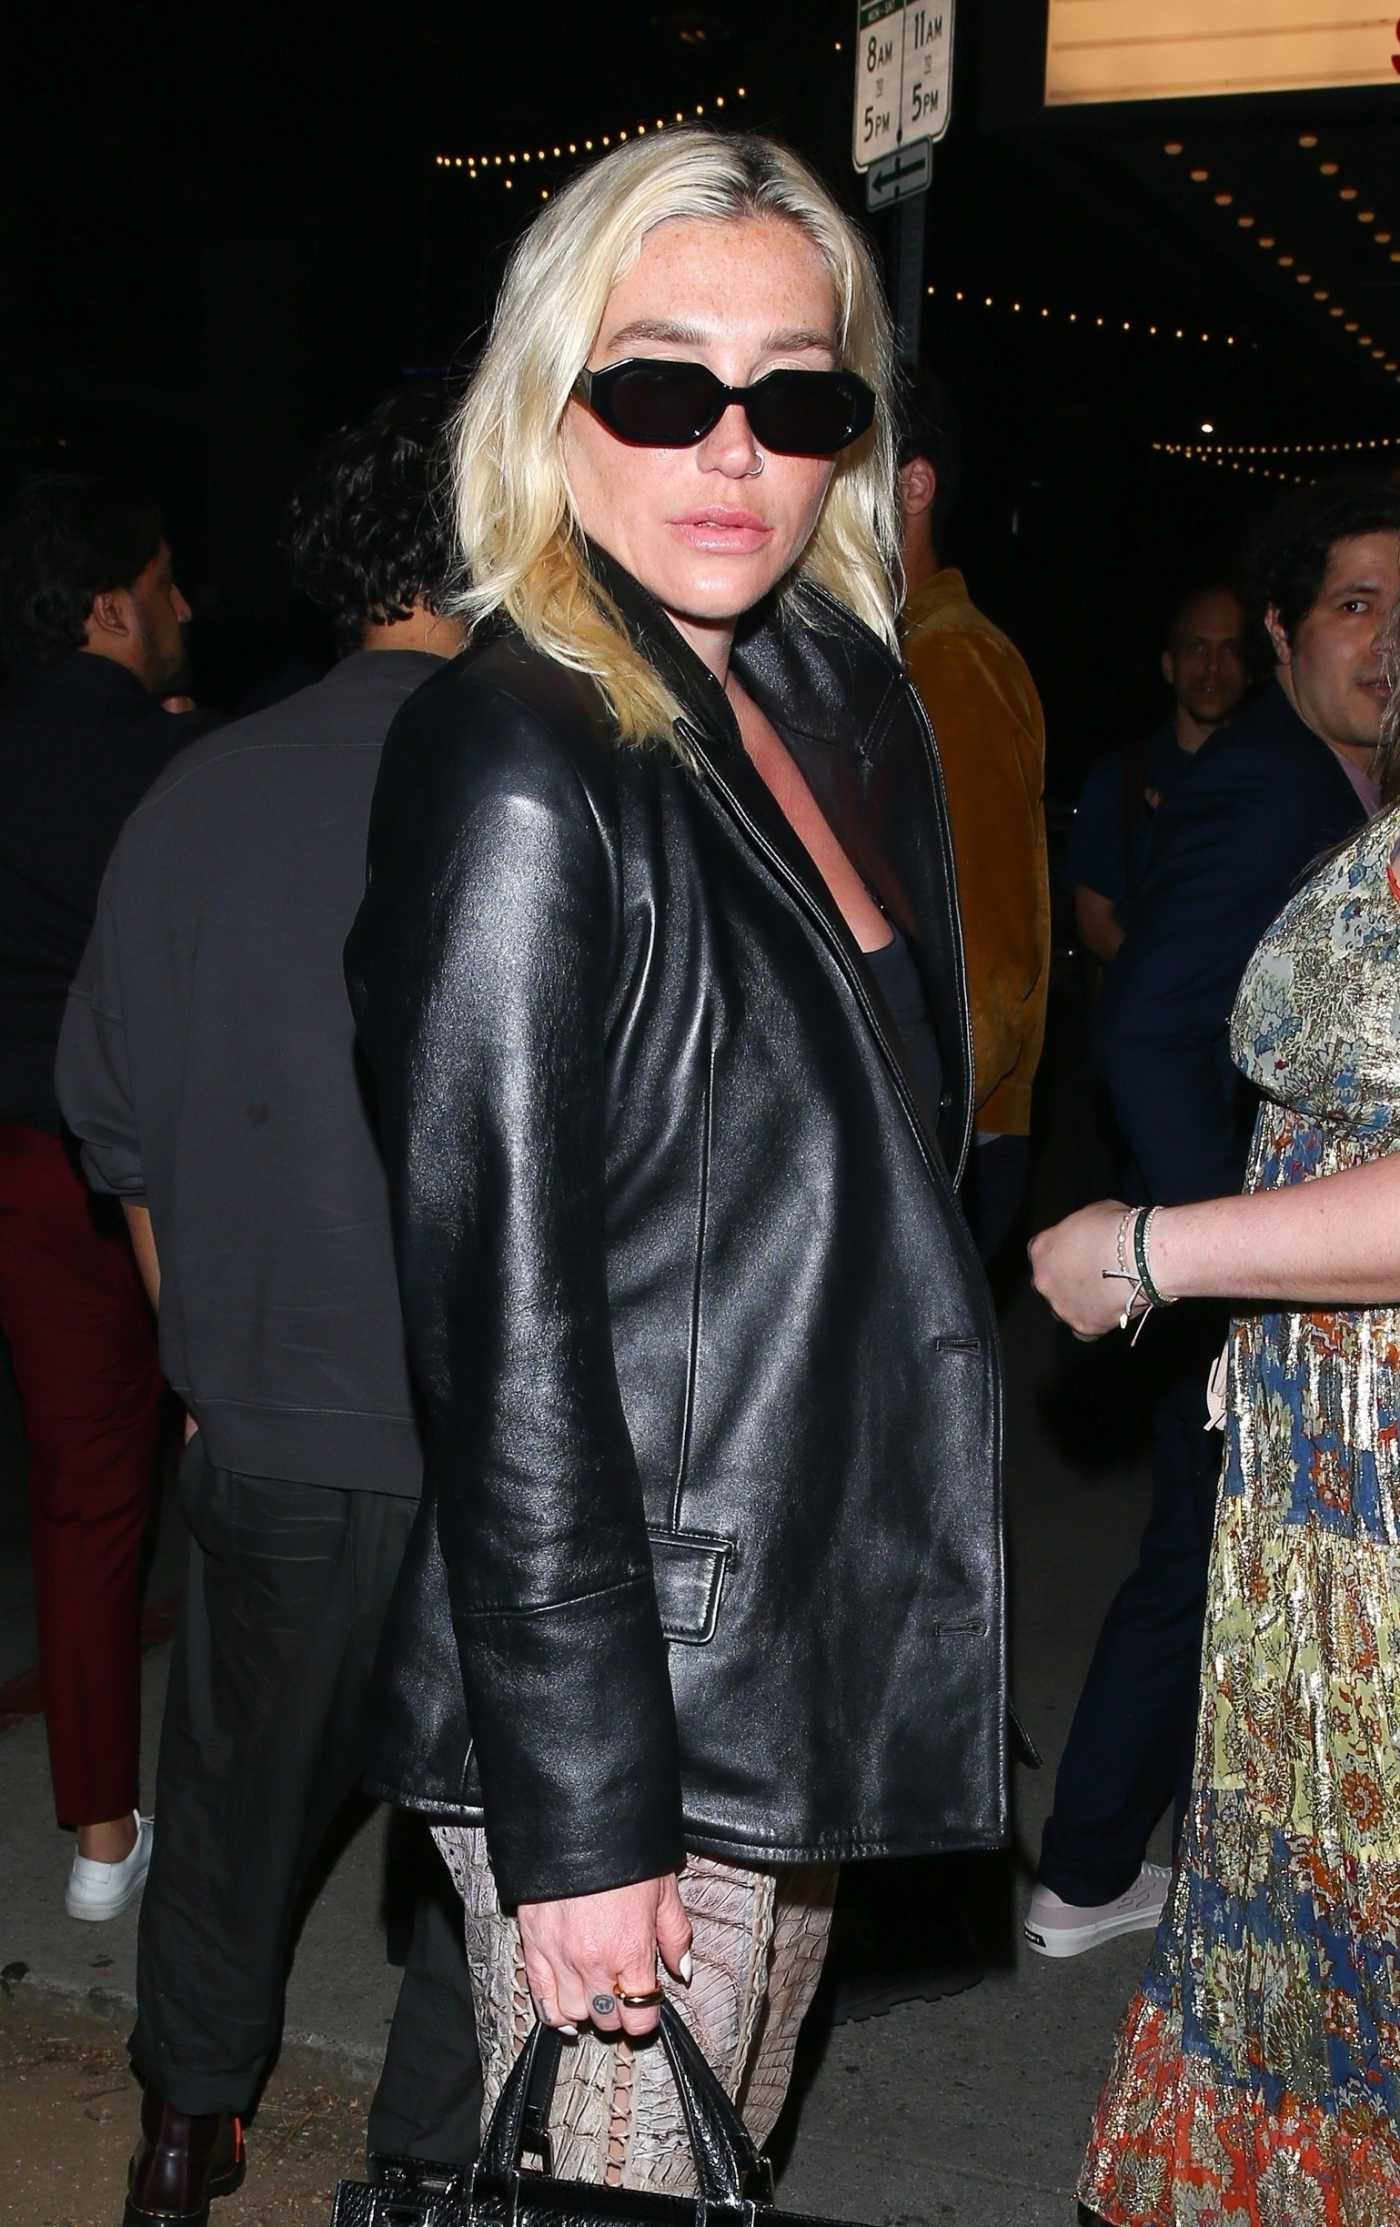 Kesha in a Black Leather Blazer Arrives at Joaquin Phoenix's Beau is Afraid After Party in Hollywood 04/10/2023